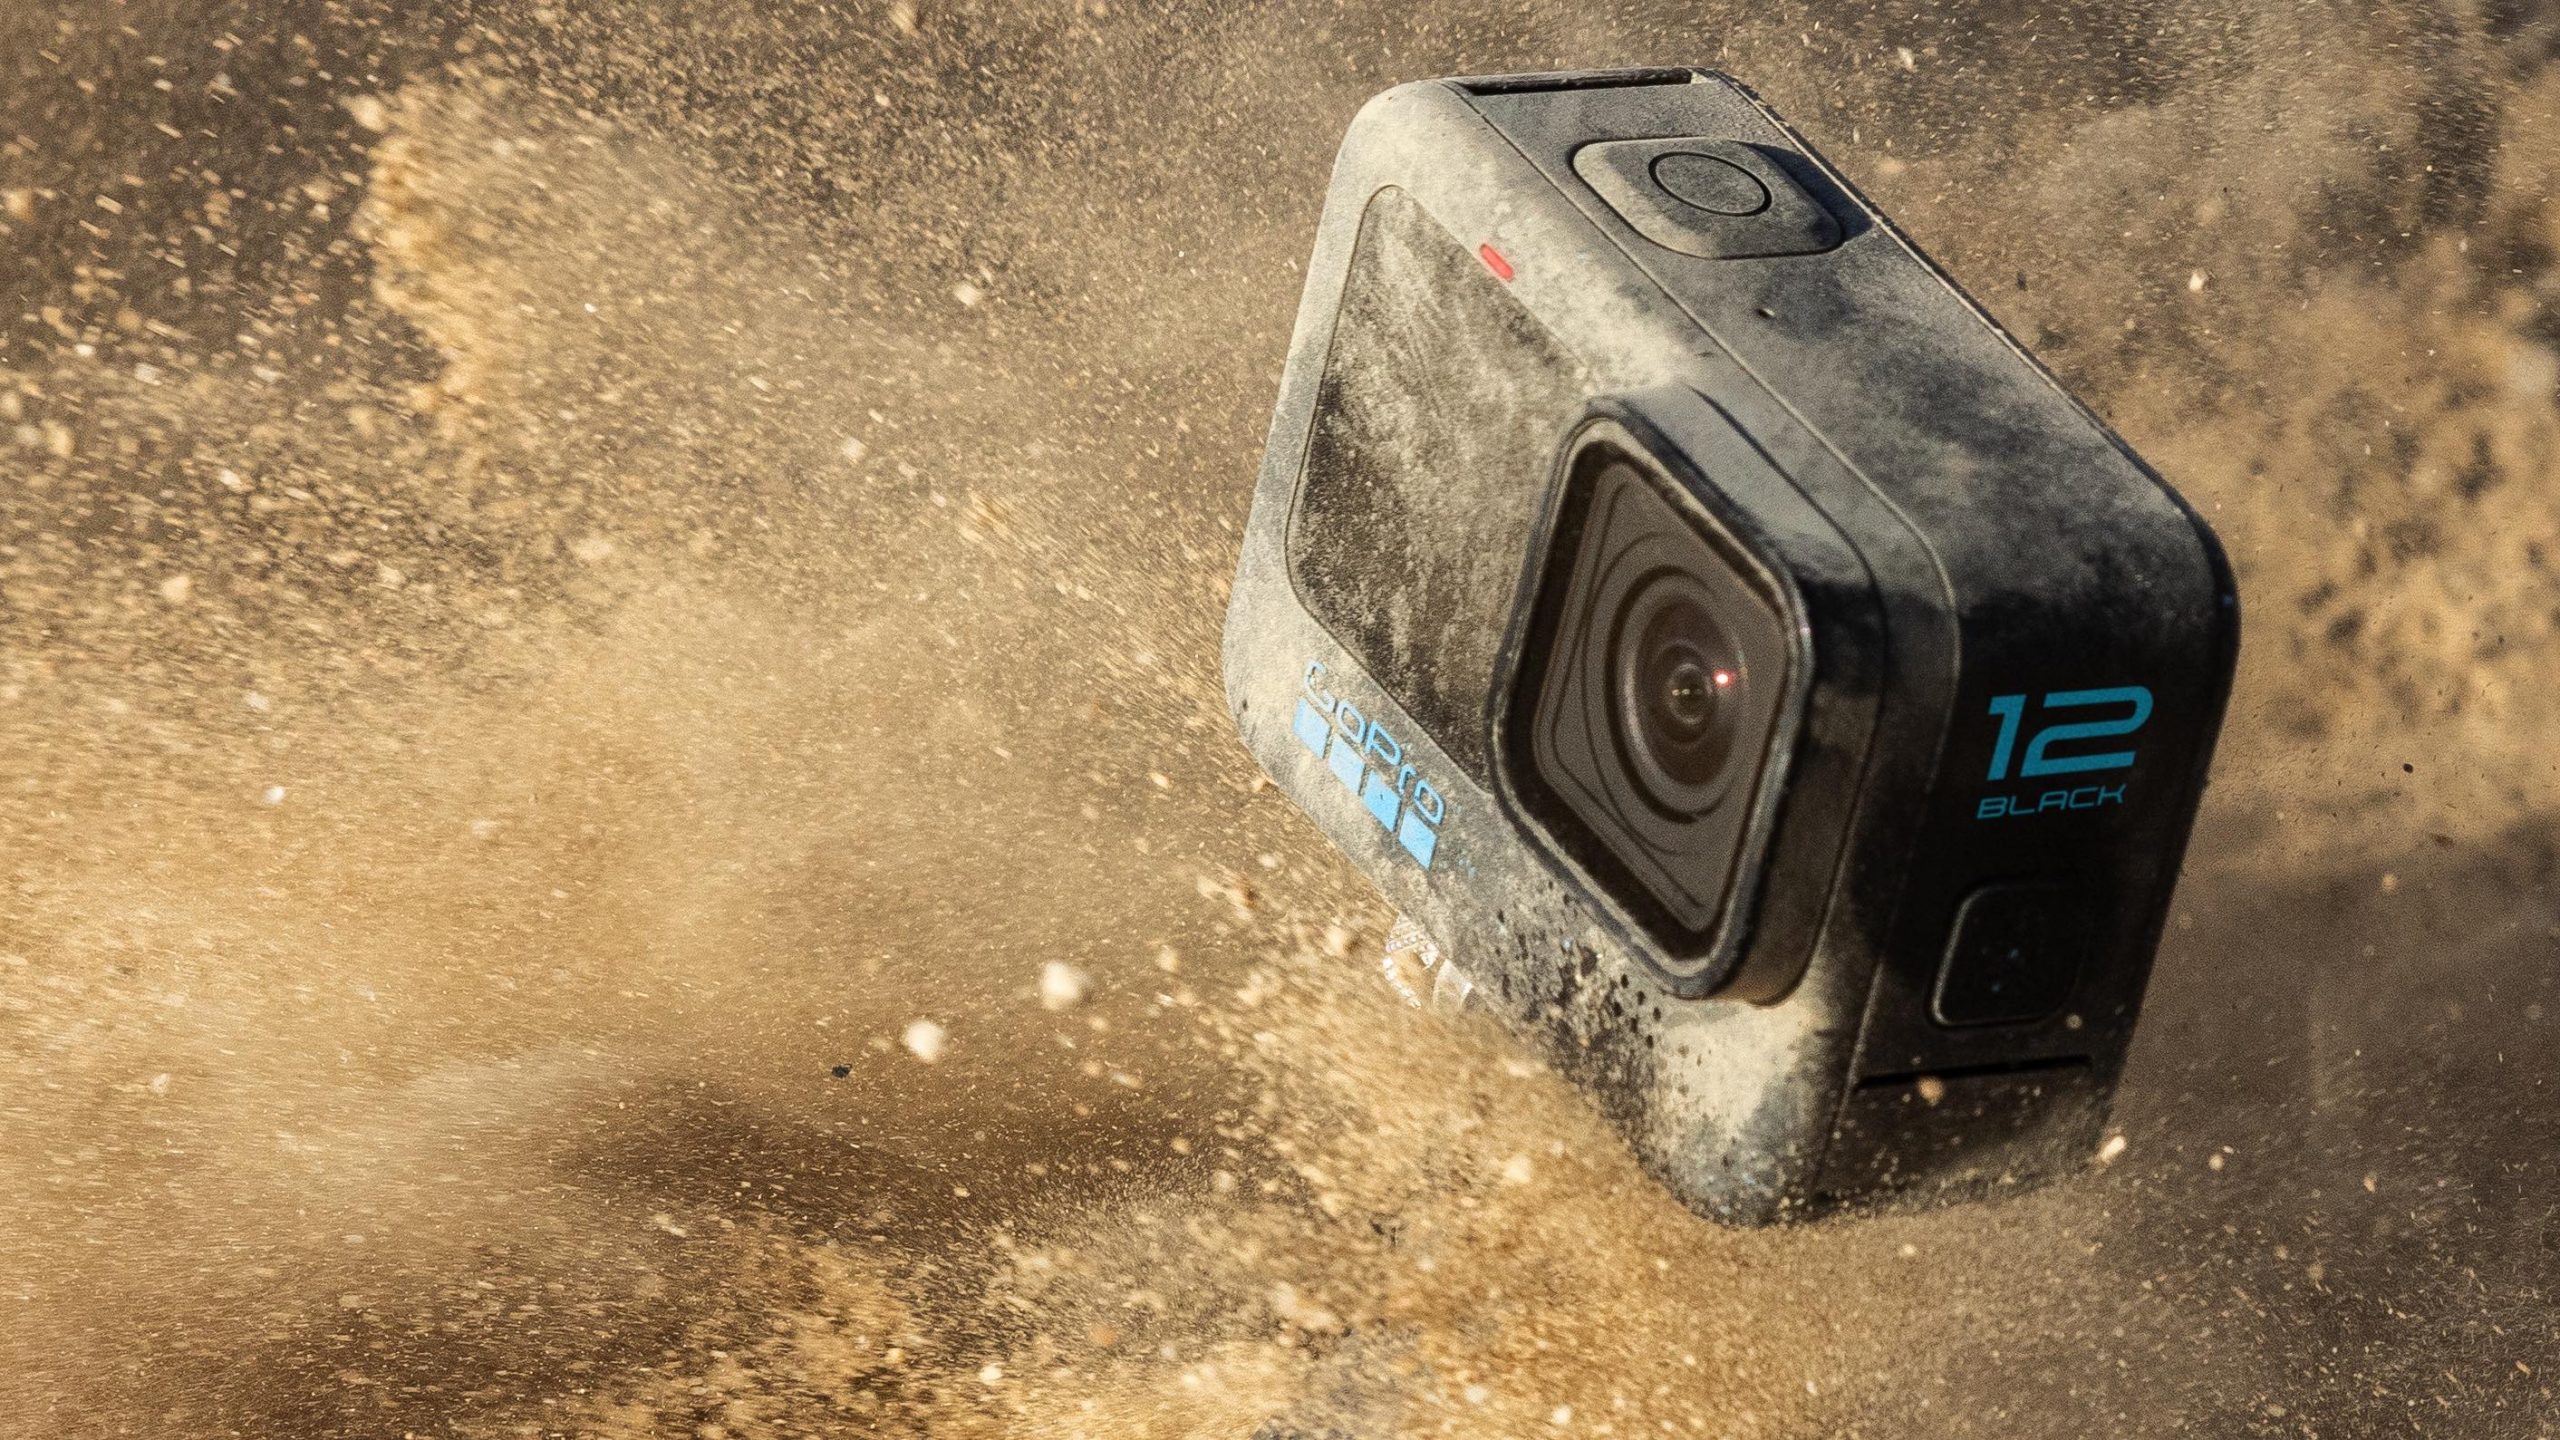 GoPro's new Hero 12 Black gets the action camera upgrade we've all been  waiting for